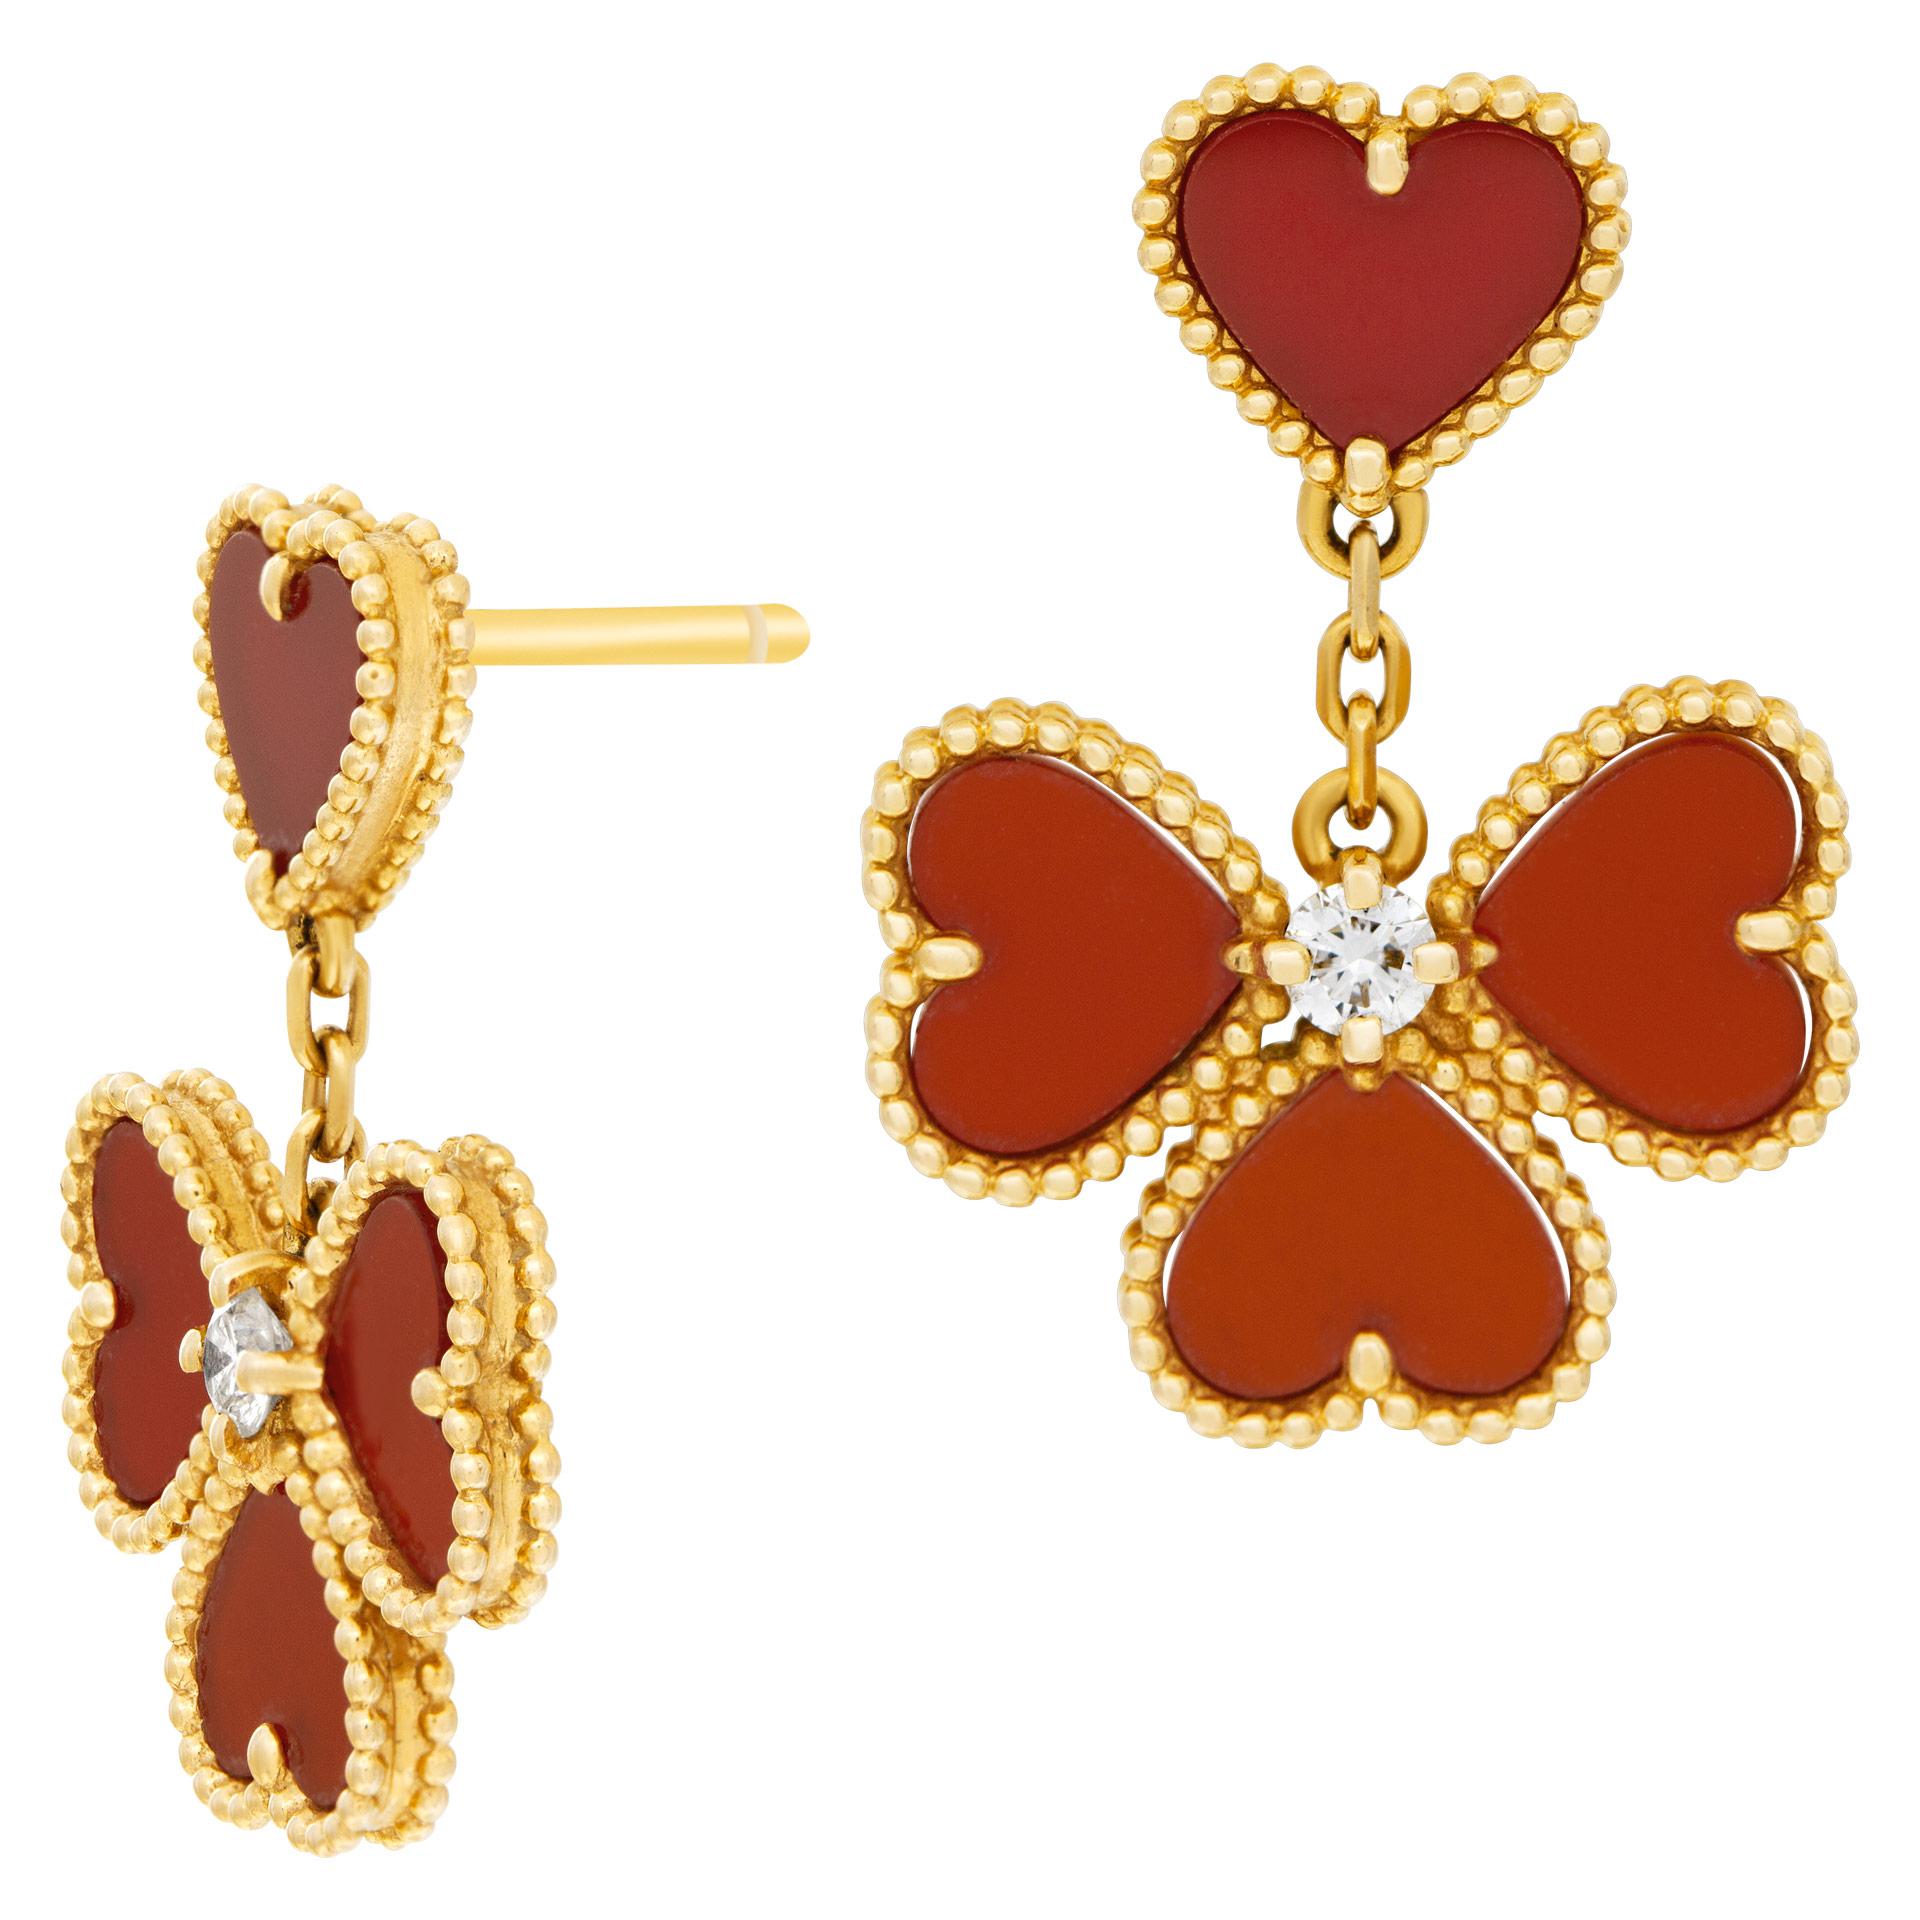 ESTIMATED RETAIL $7,000.00 - YOUR PRICE $6,300.00 - Van Cleef & Arpels Sweet Alhambra Effeuillage drop earrings featuring red carnelian stone with 0.17 carats of round brilliant cut diamonds. Drop length: 1''.